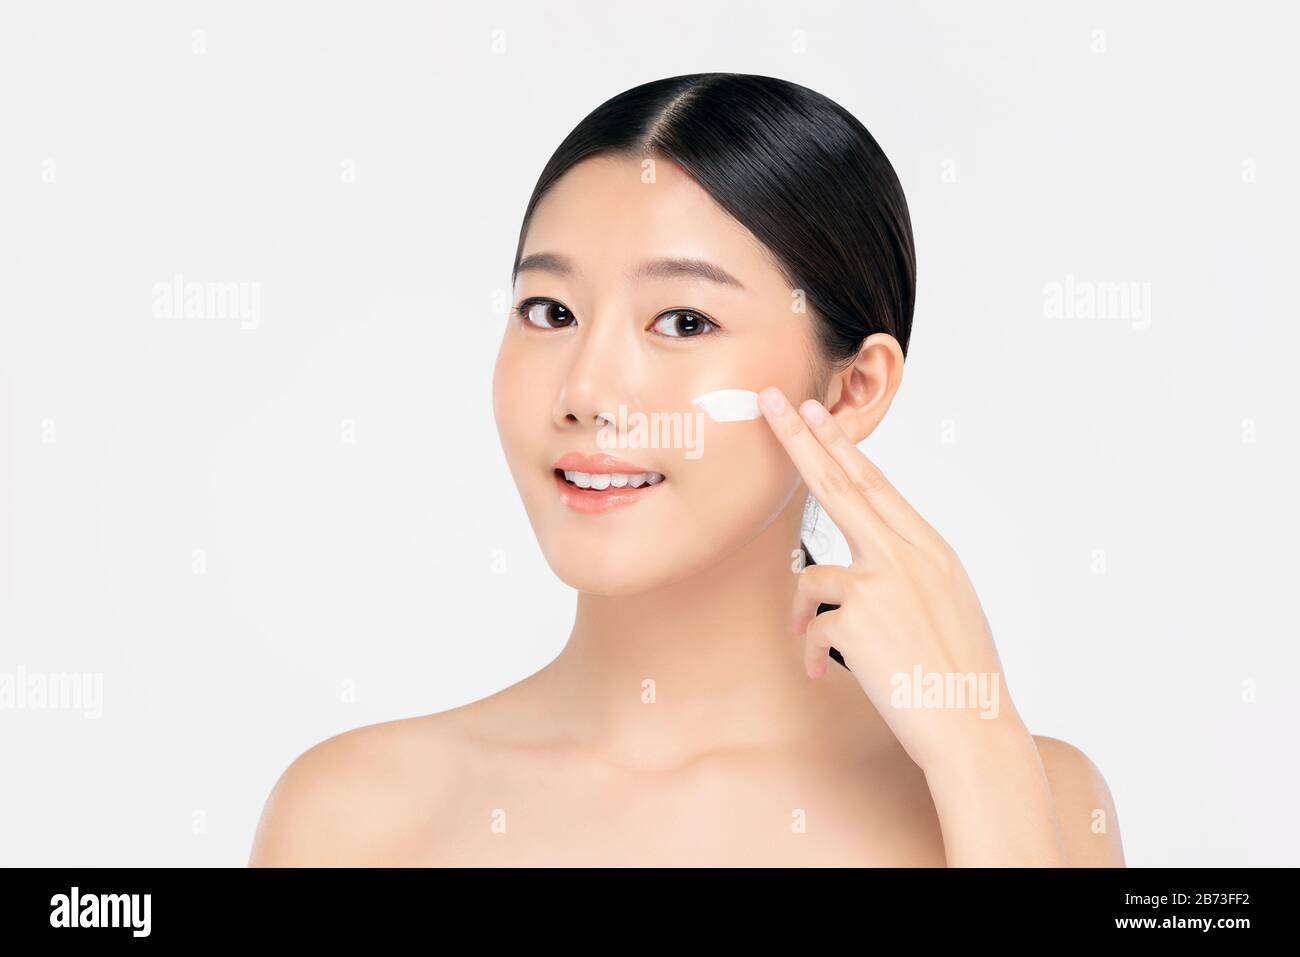 Young beautiful Asian woman with fresh clean appearance applying cream to face isolated on white background for beauty and skin care concepts Stock Photo